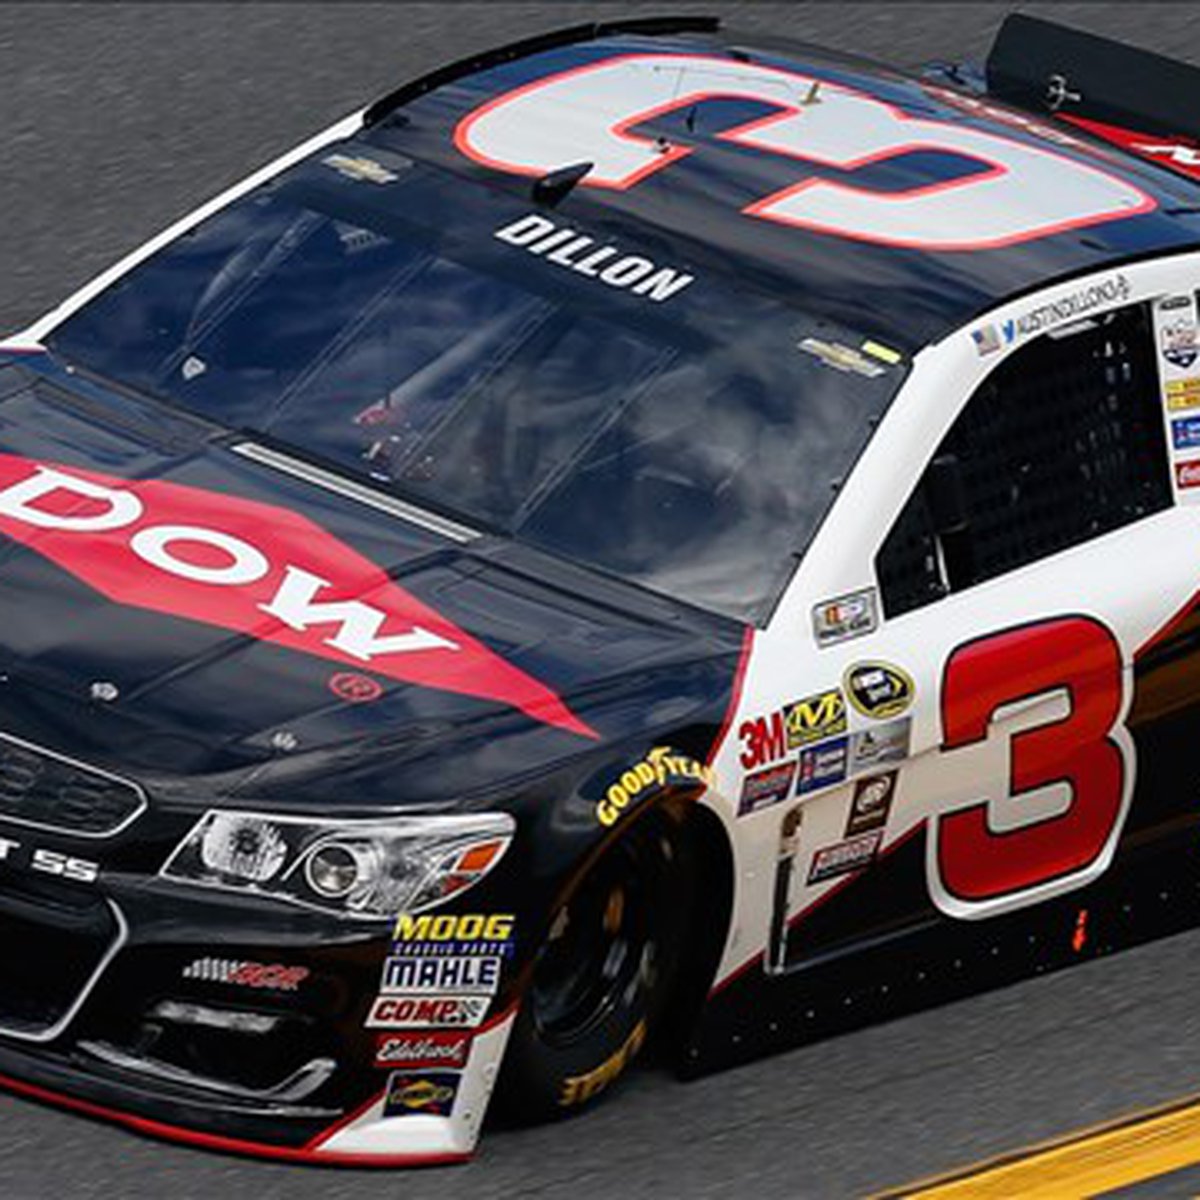 Austin Dillon Wins Daytona 500 In The No. 3 Chevrolet On 17 Year Anniversary Of Dale Earnhardt's Death